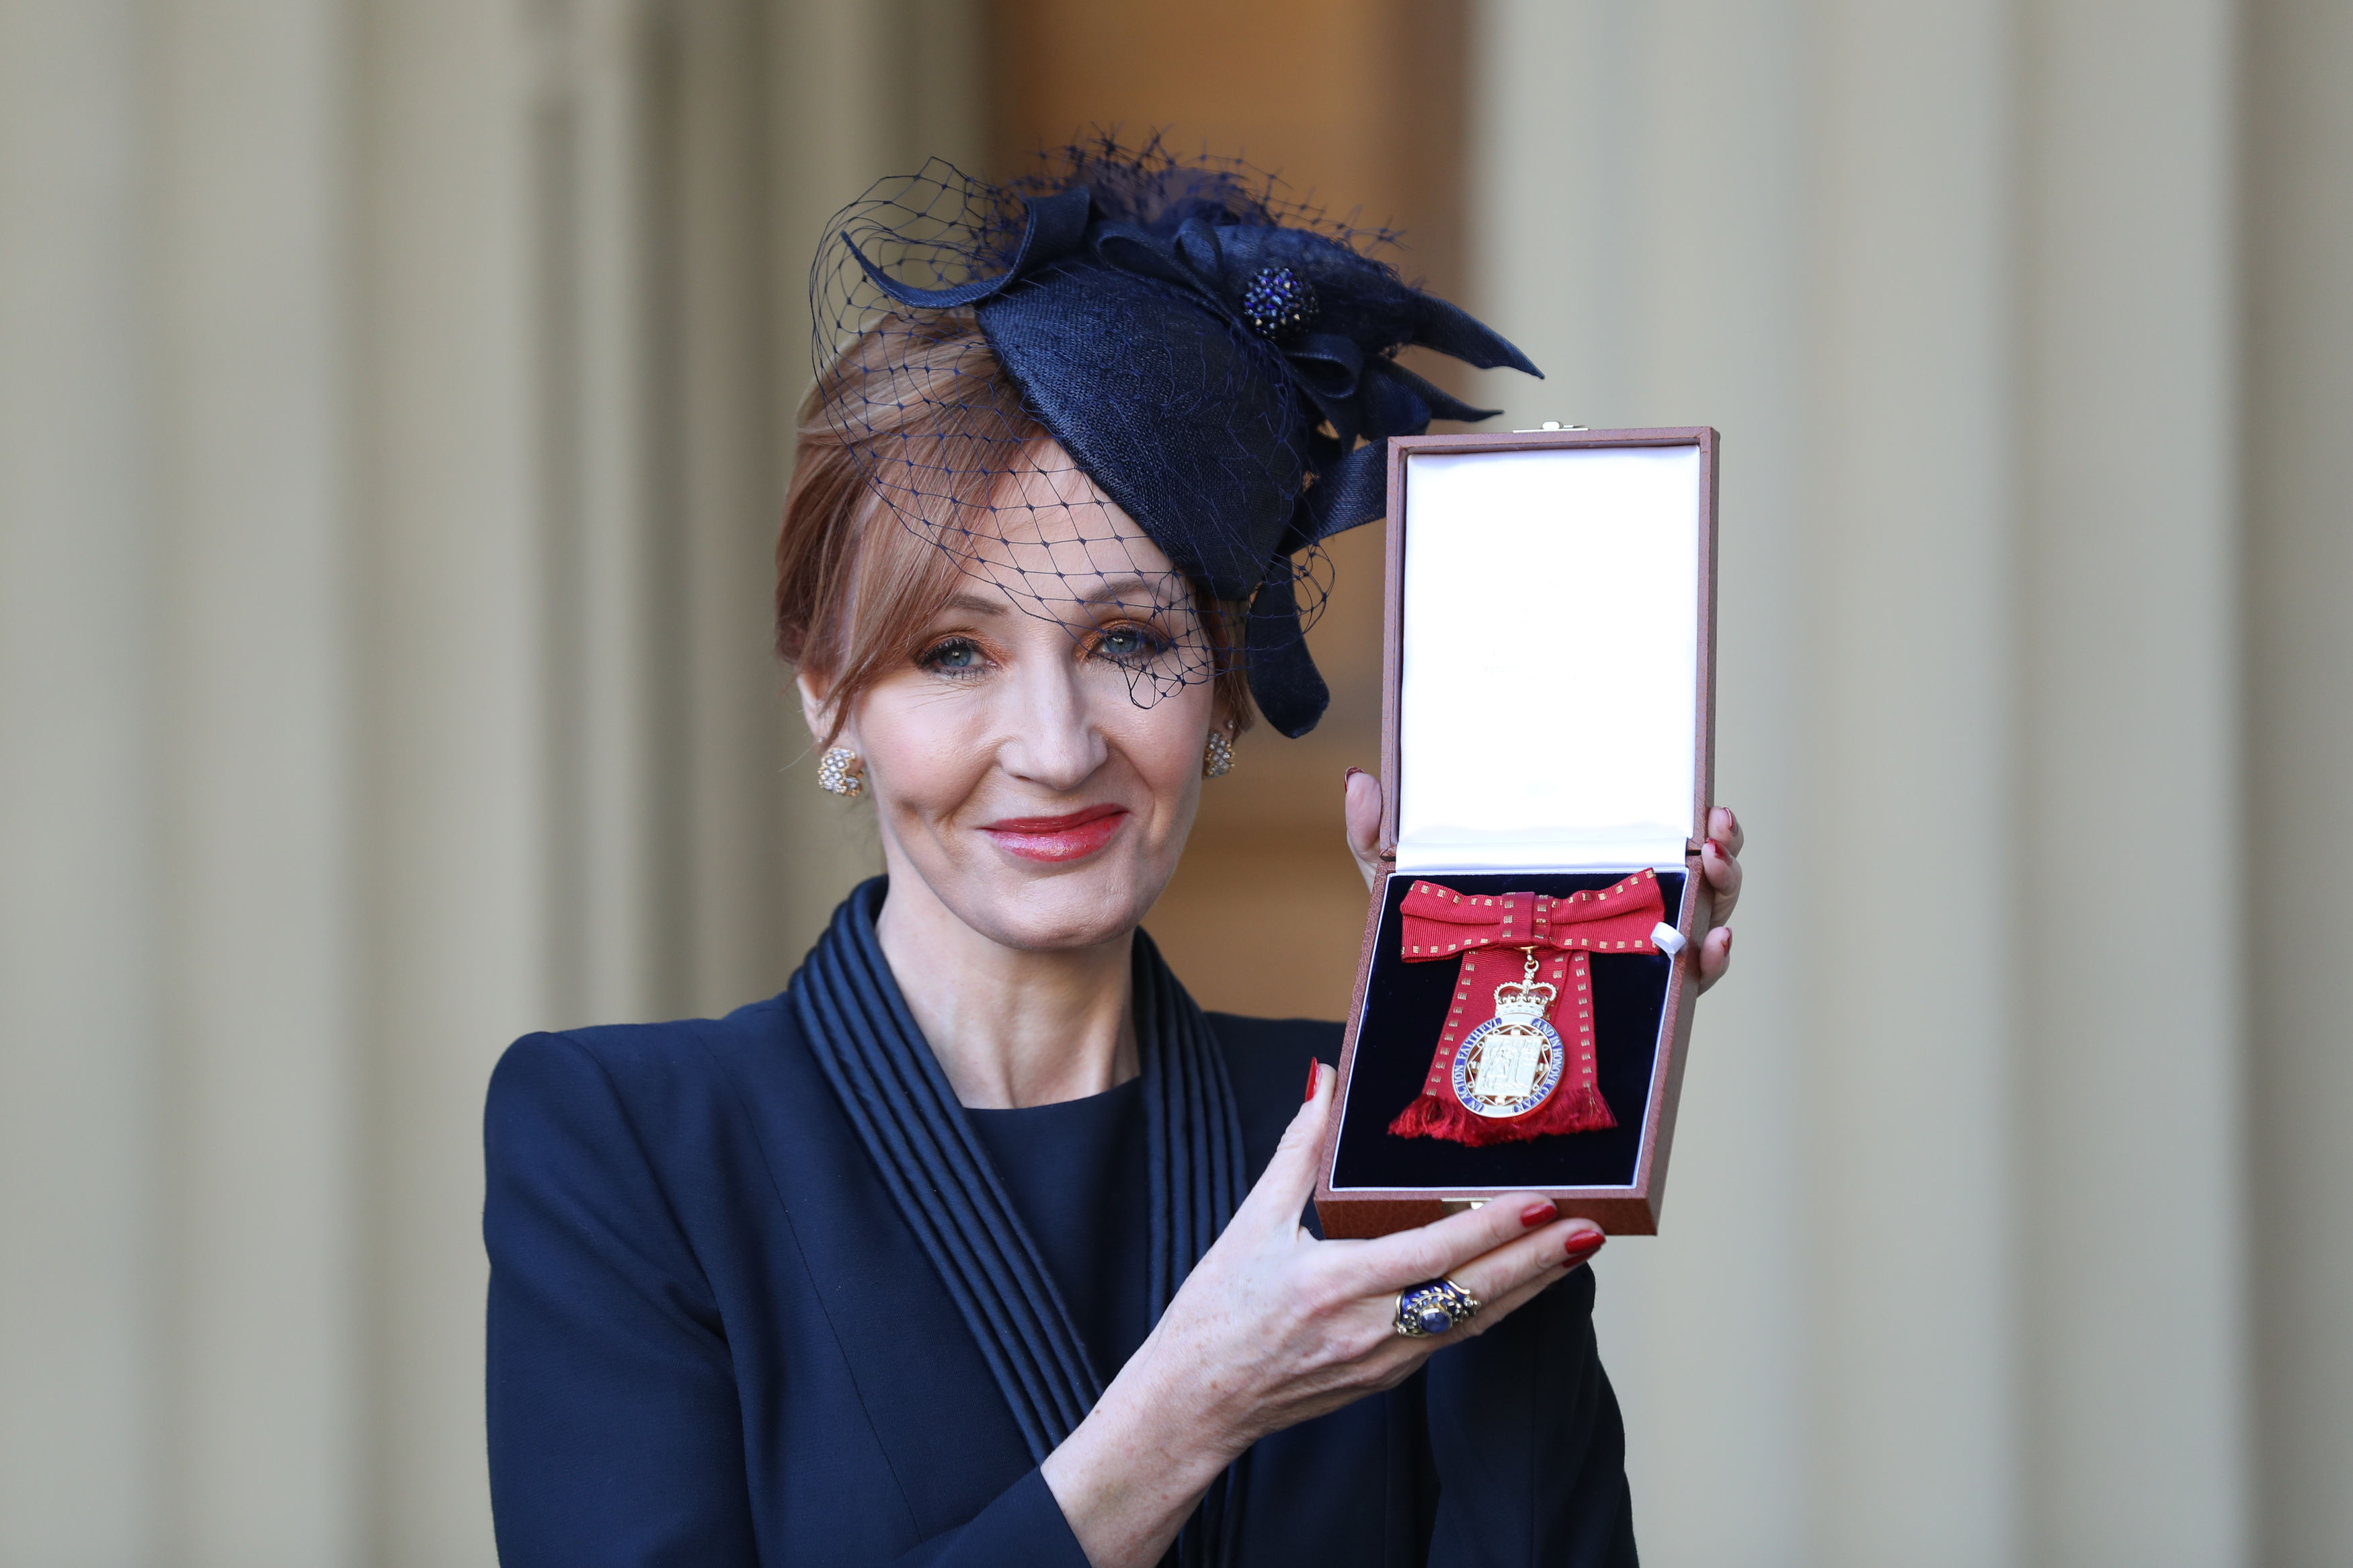 J.K. Rowling has also been recognized for her contributions to children's literature in general. In 2000, she was awarded the Order of the British Empire (OBE) for services to children's literature. 